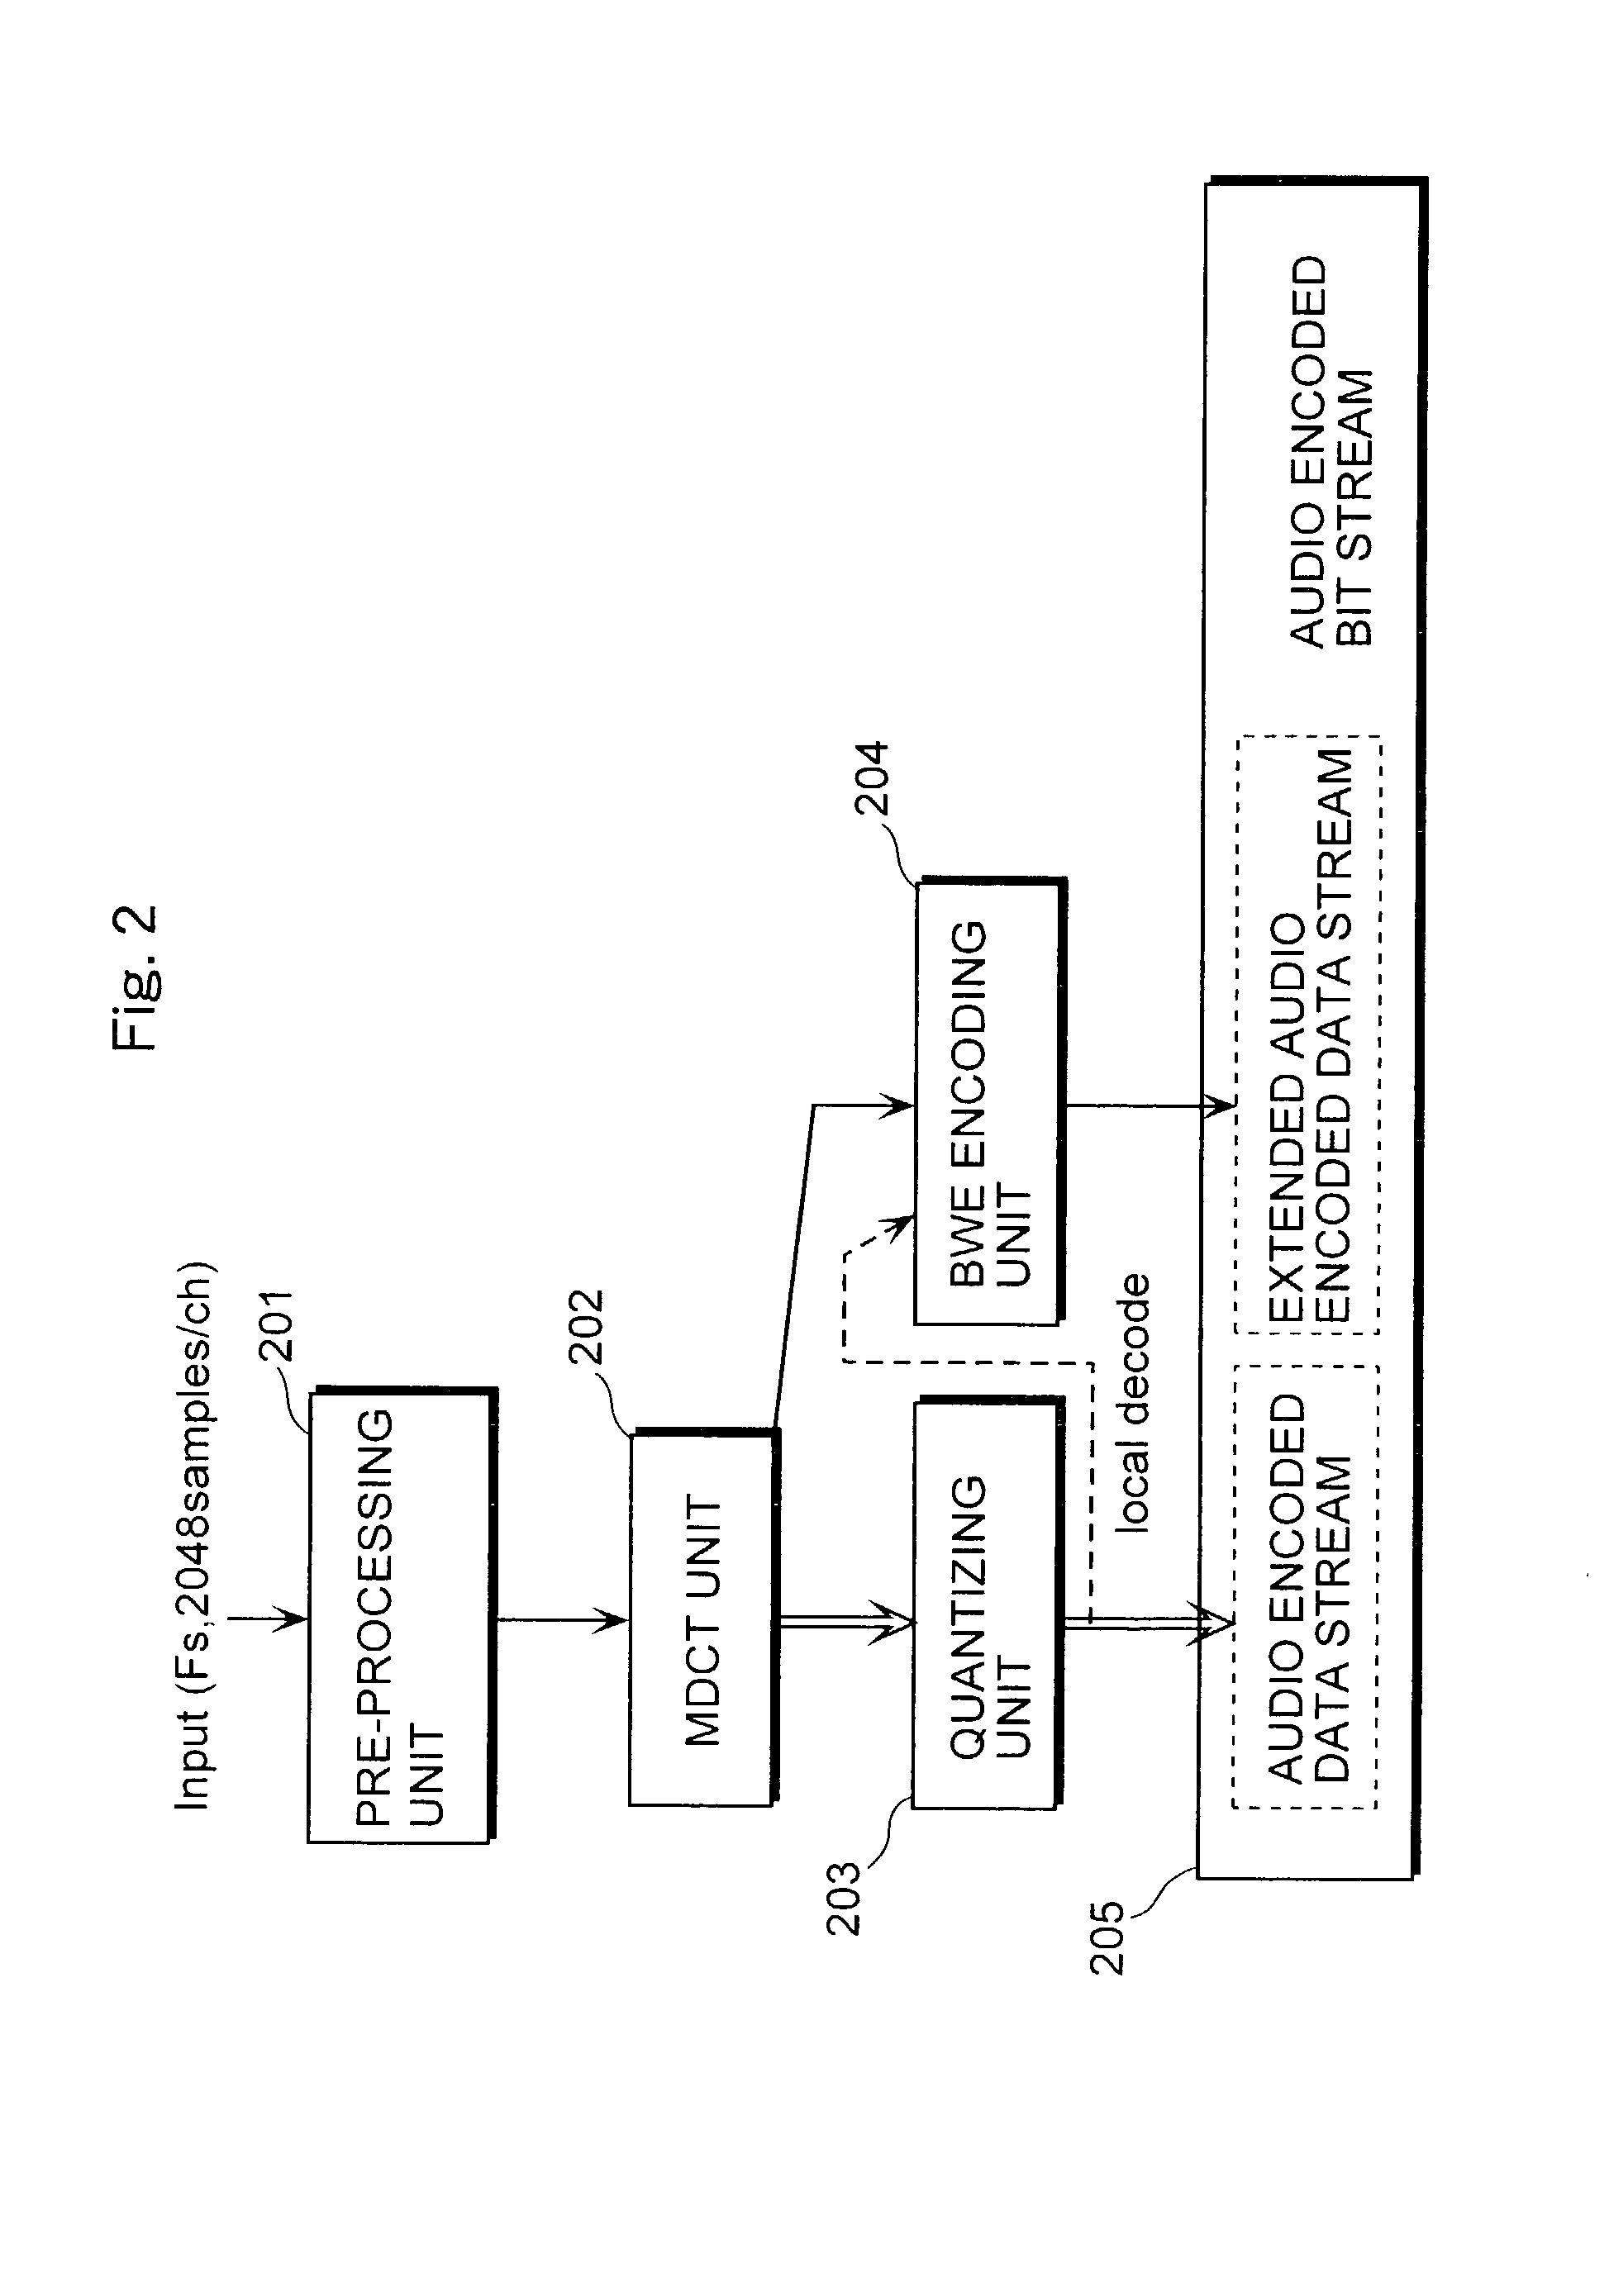 Encoding device and decoding device